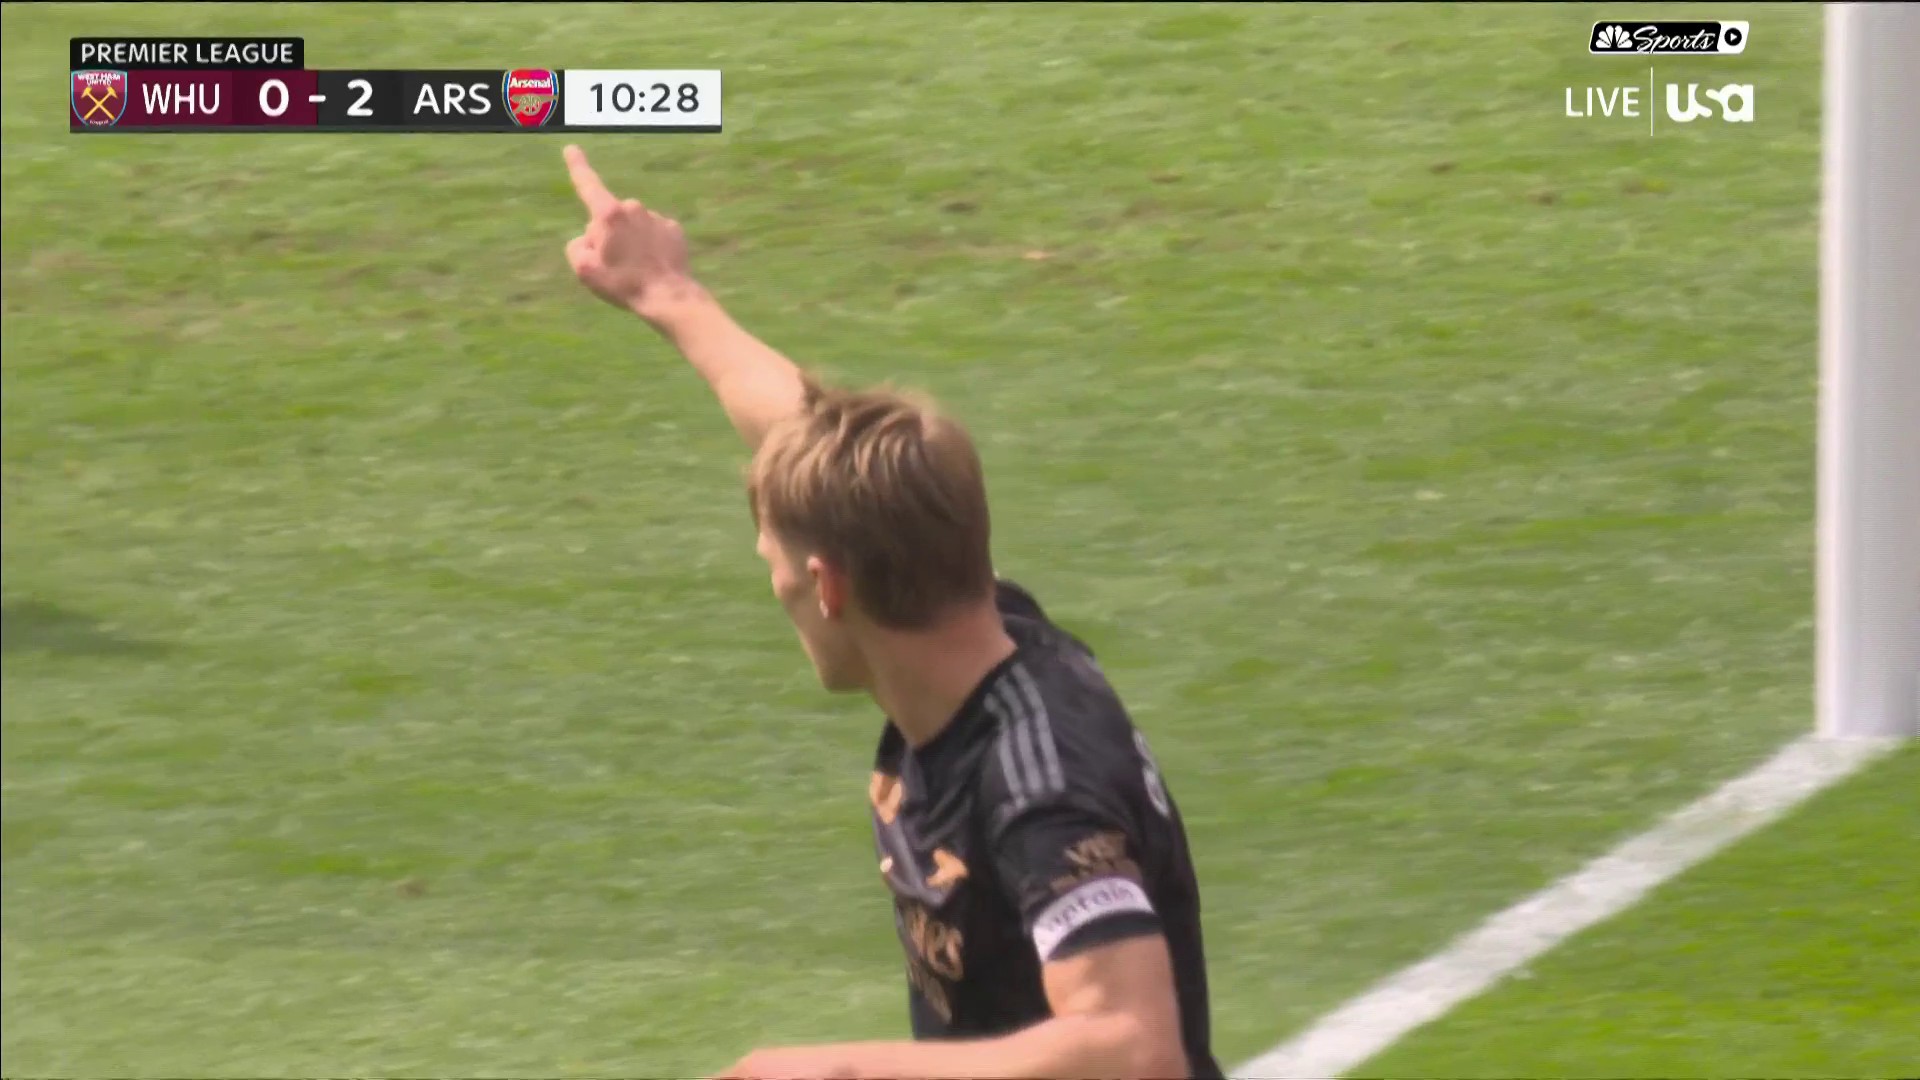 Odegaard with the volley and Arsenal lead 2-0 in under 10 minutes!

📺: @USANetwork | #WHUARS”